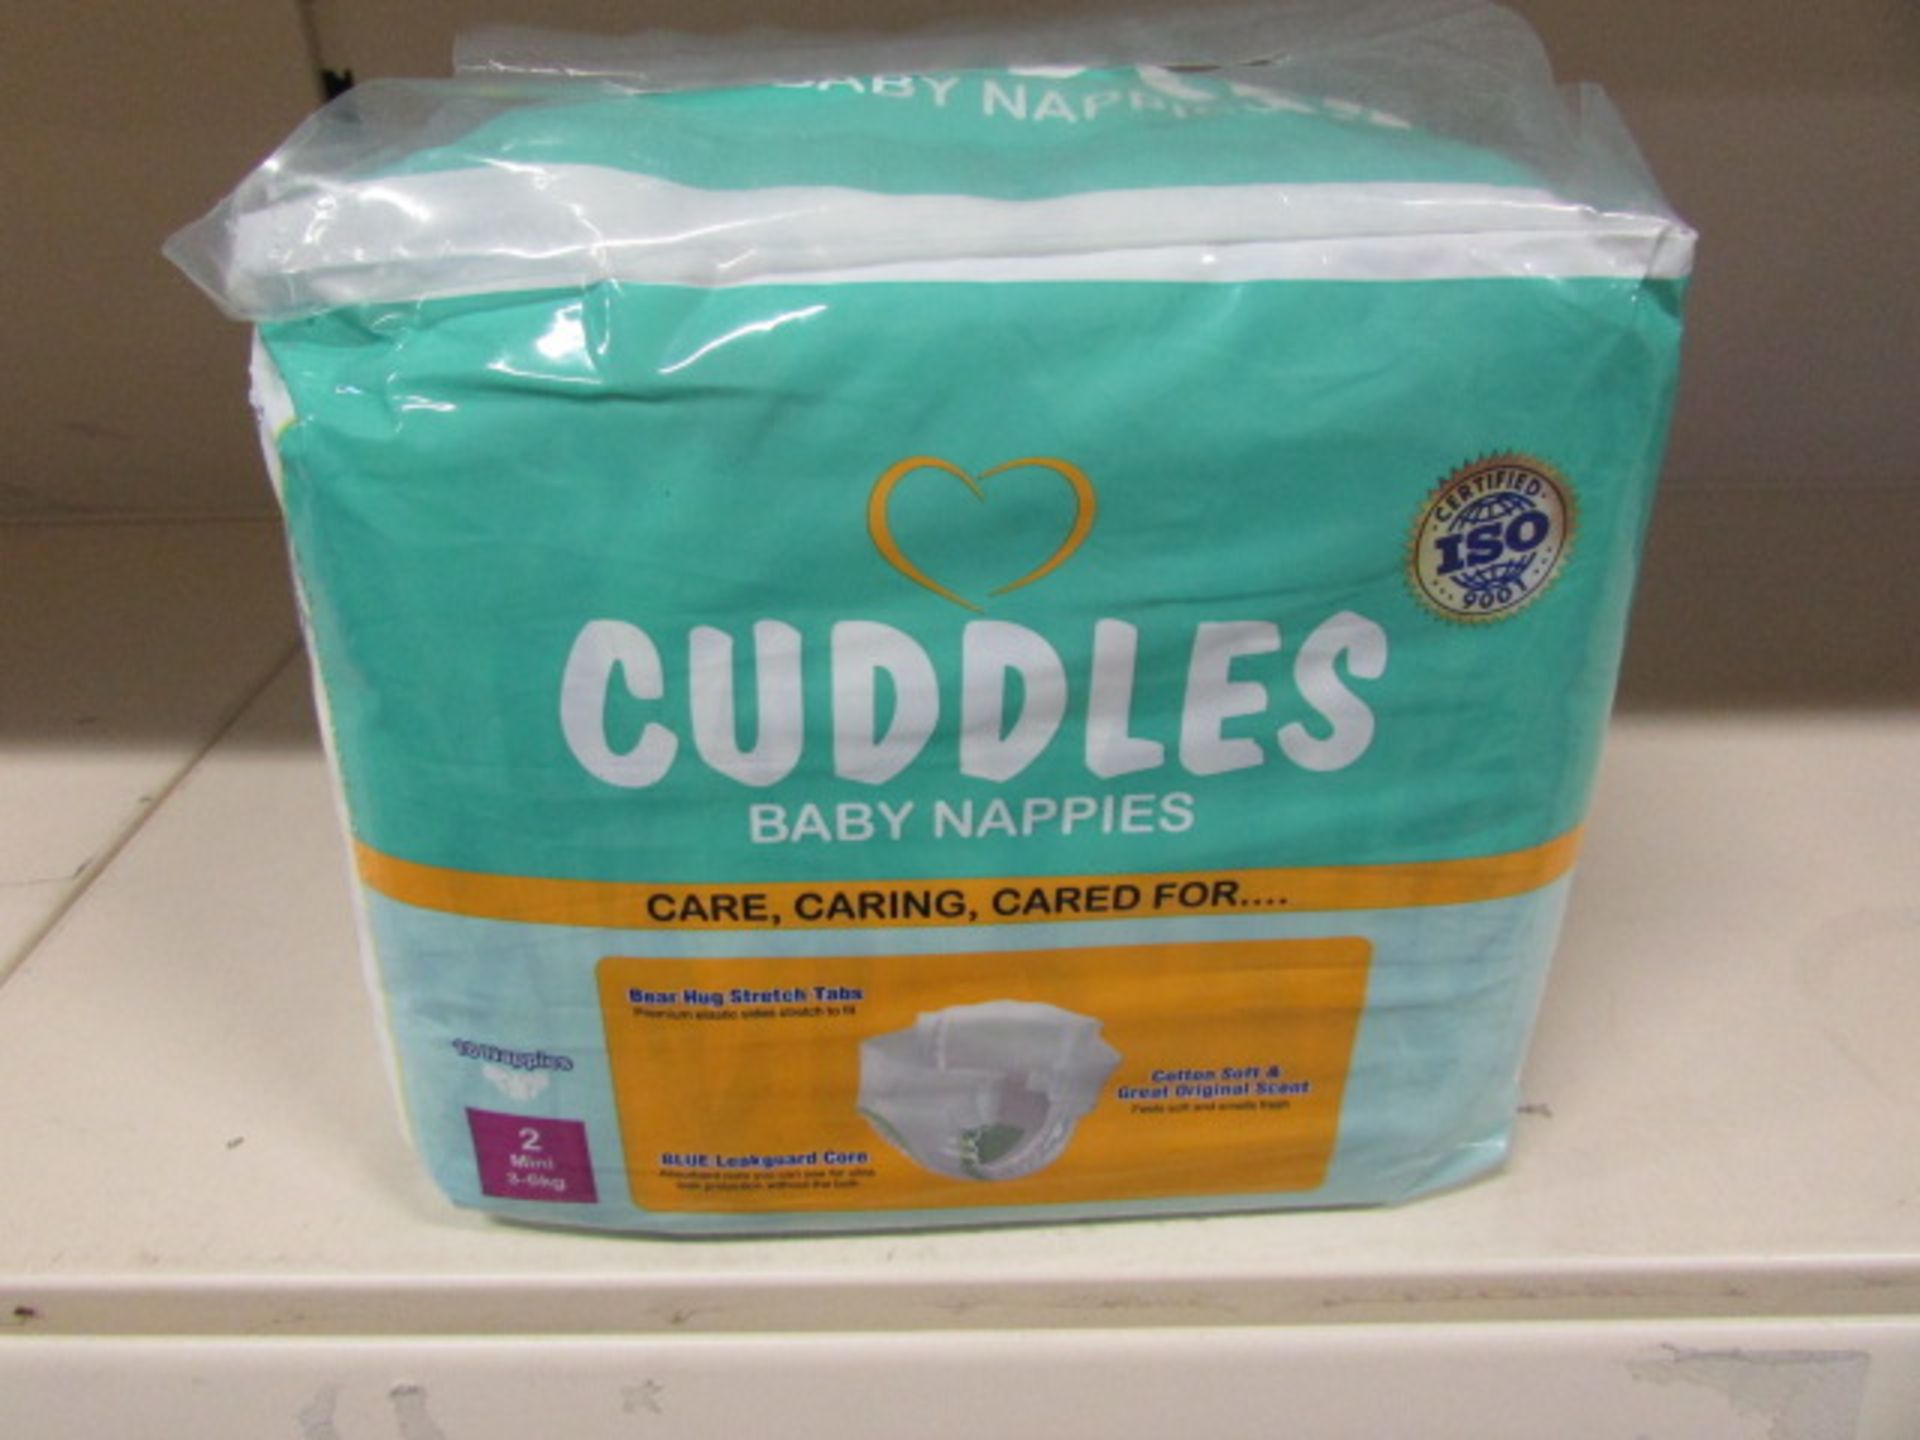 1 x Outer Carton, 10 Packs In An Outer, 18 Nappies in A Pack (180 Nappies In Total) [Size 4] - Image 4 of 6